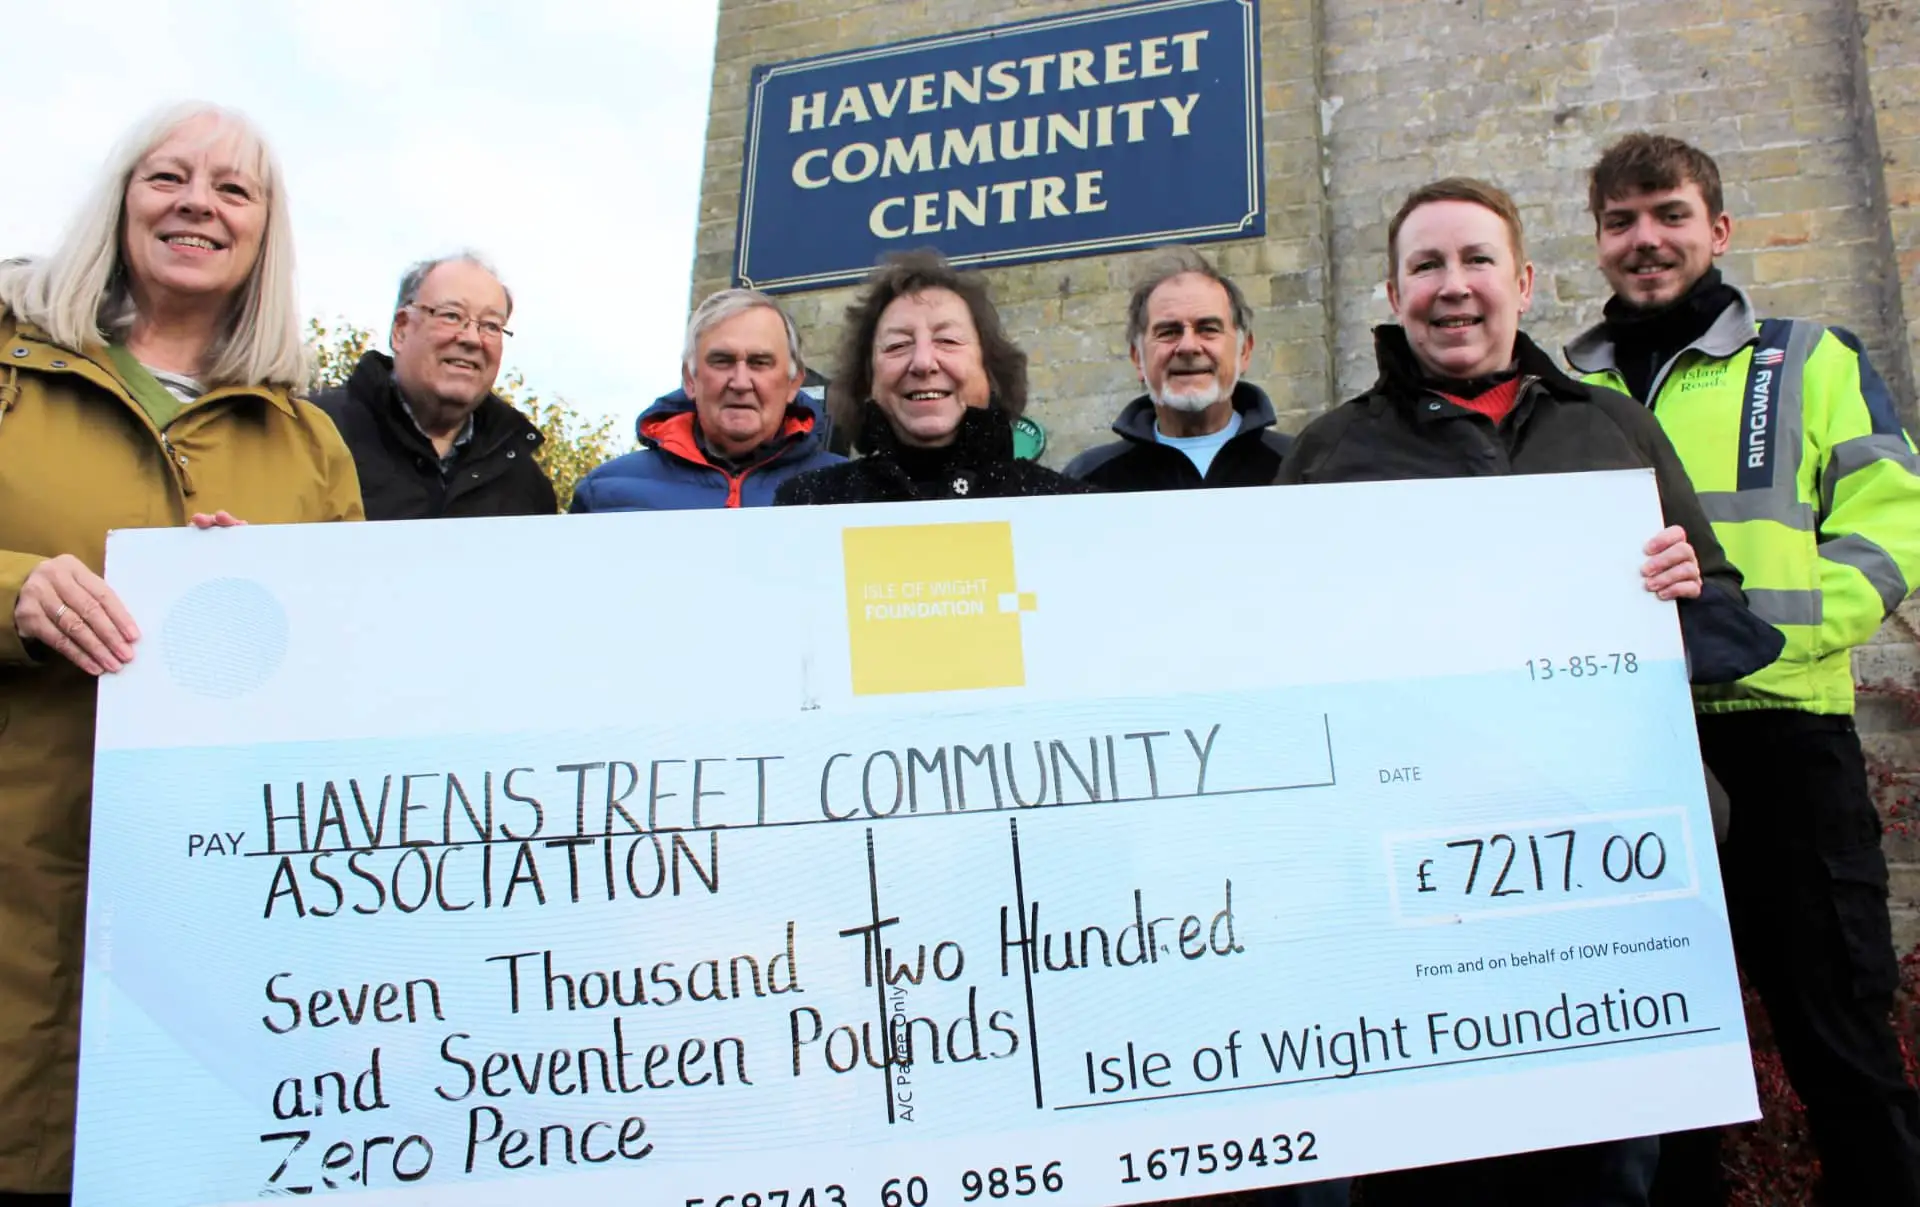 Havenstreet foundation being presented with a giant cheque fir £7217